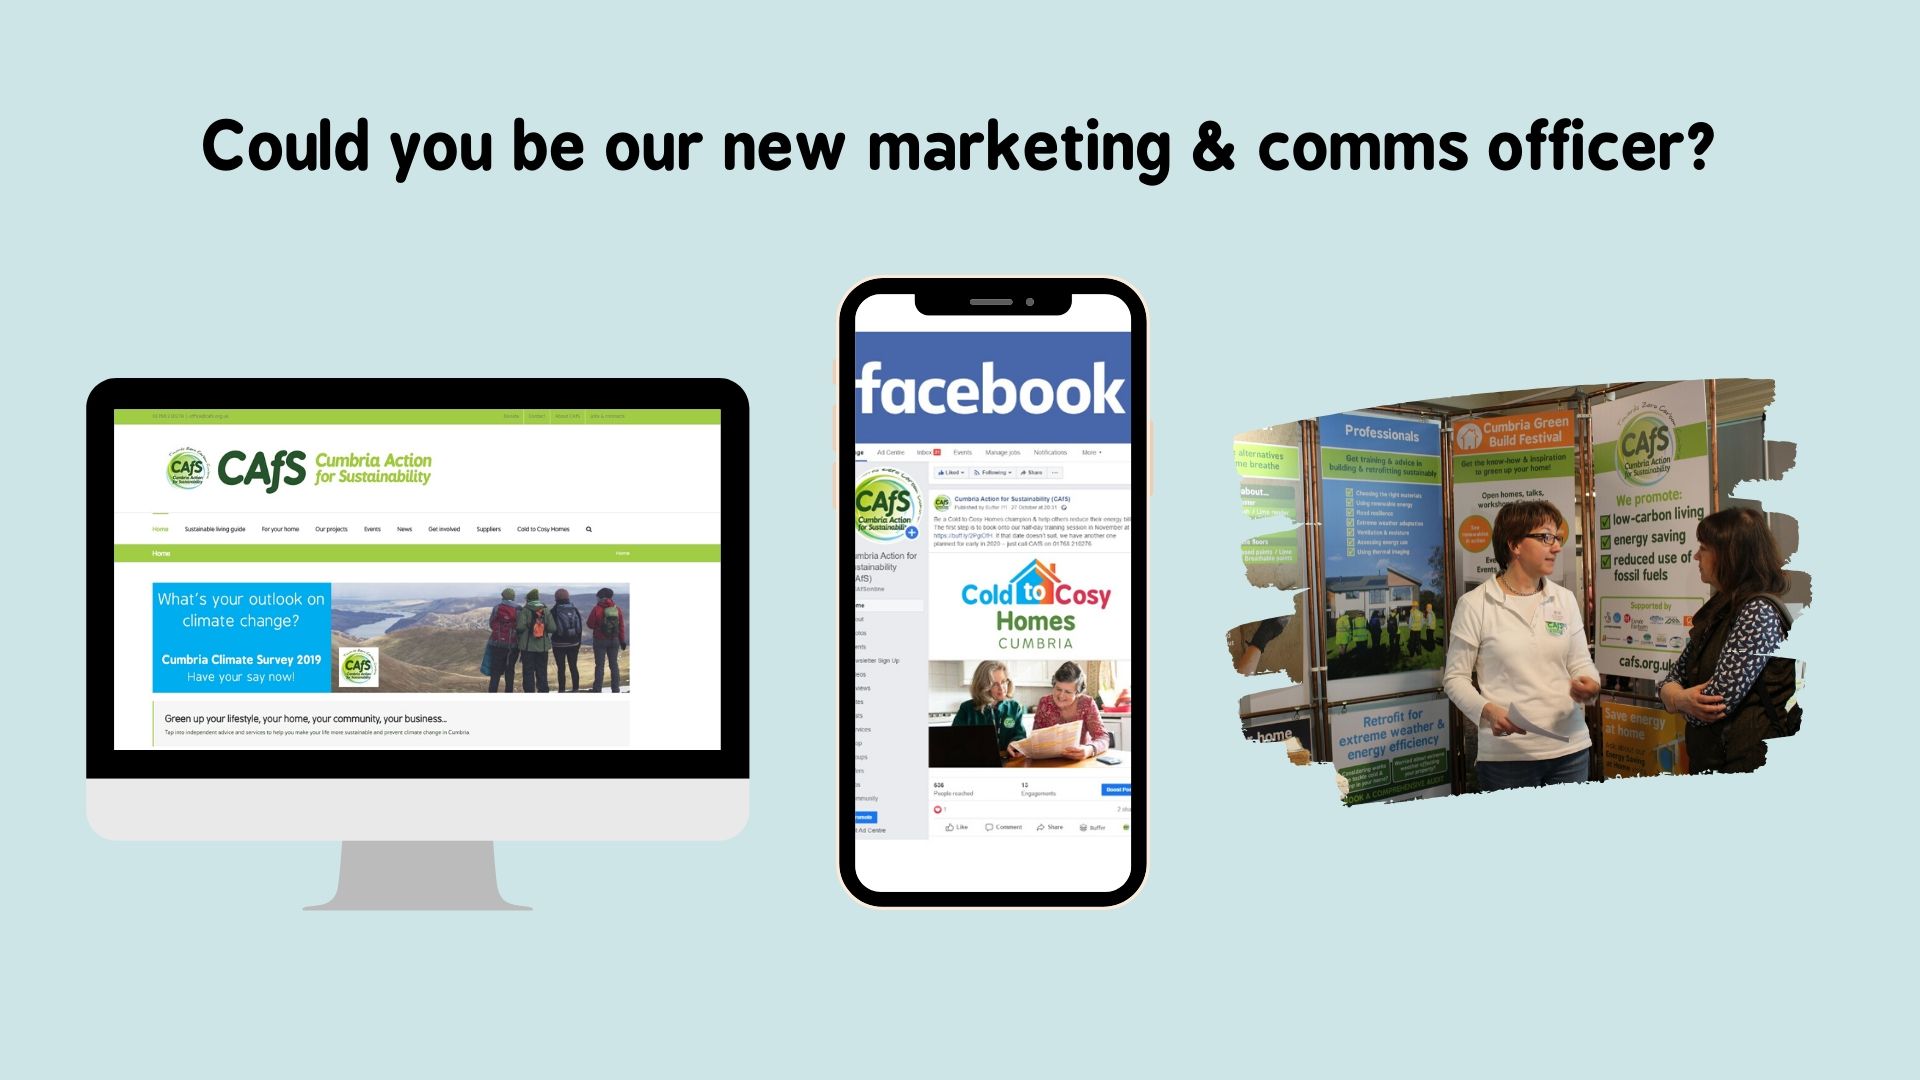 Graphic: Could you be our new marketing & comms officer? With images of CAfS website, Facebook page and a stall